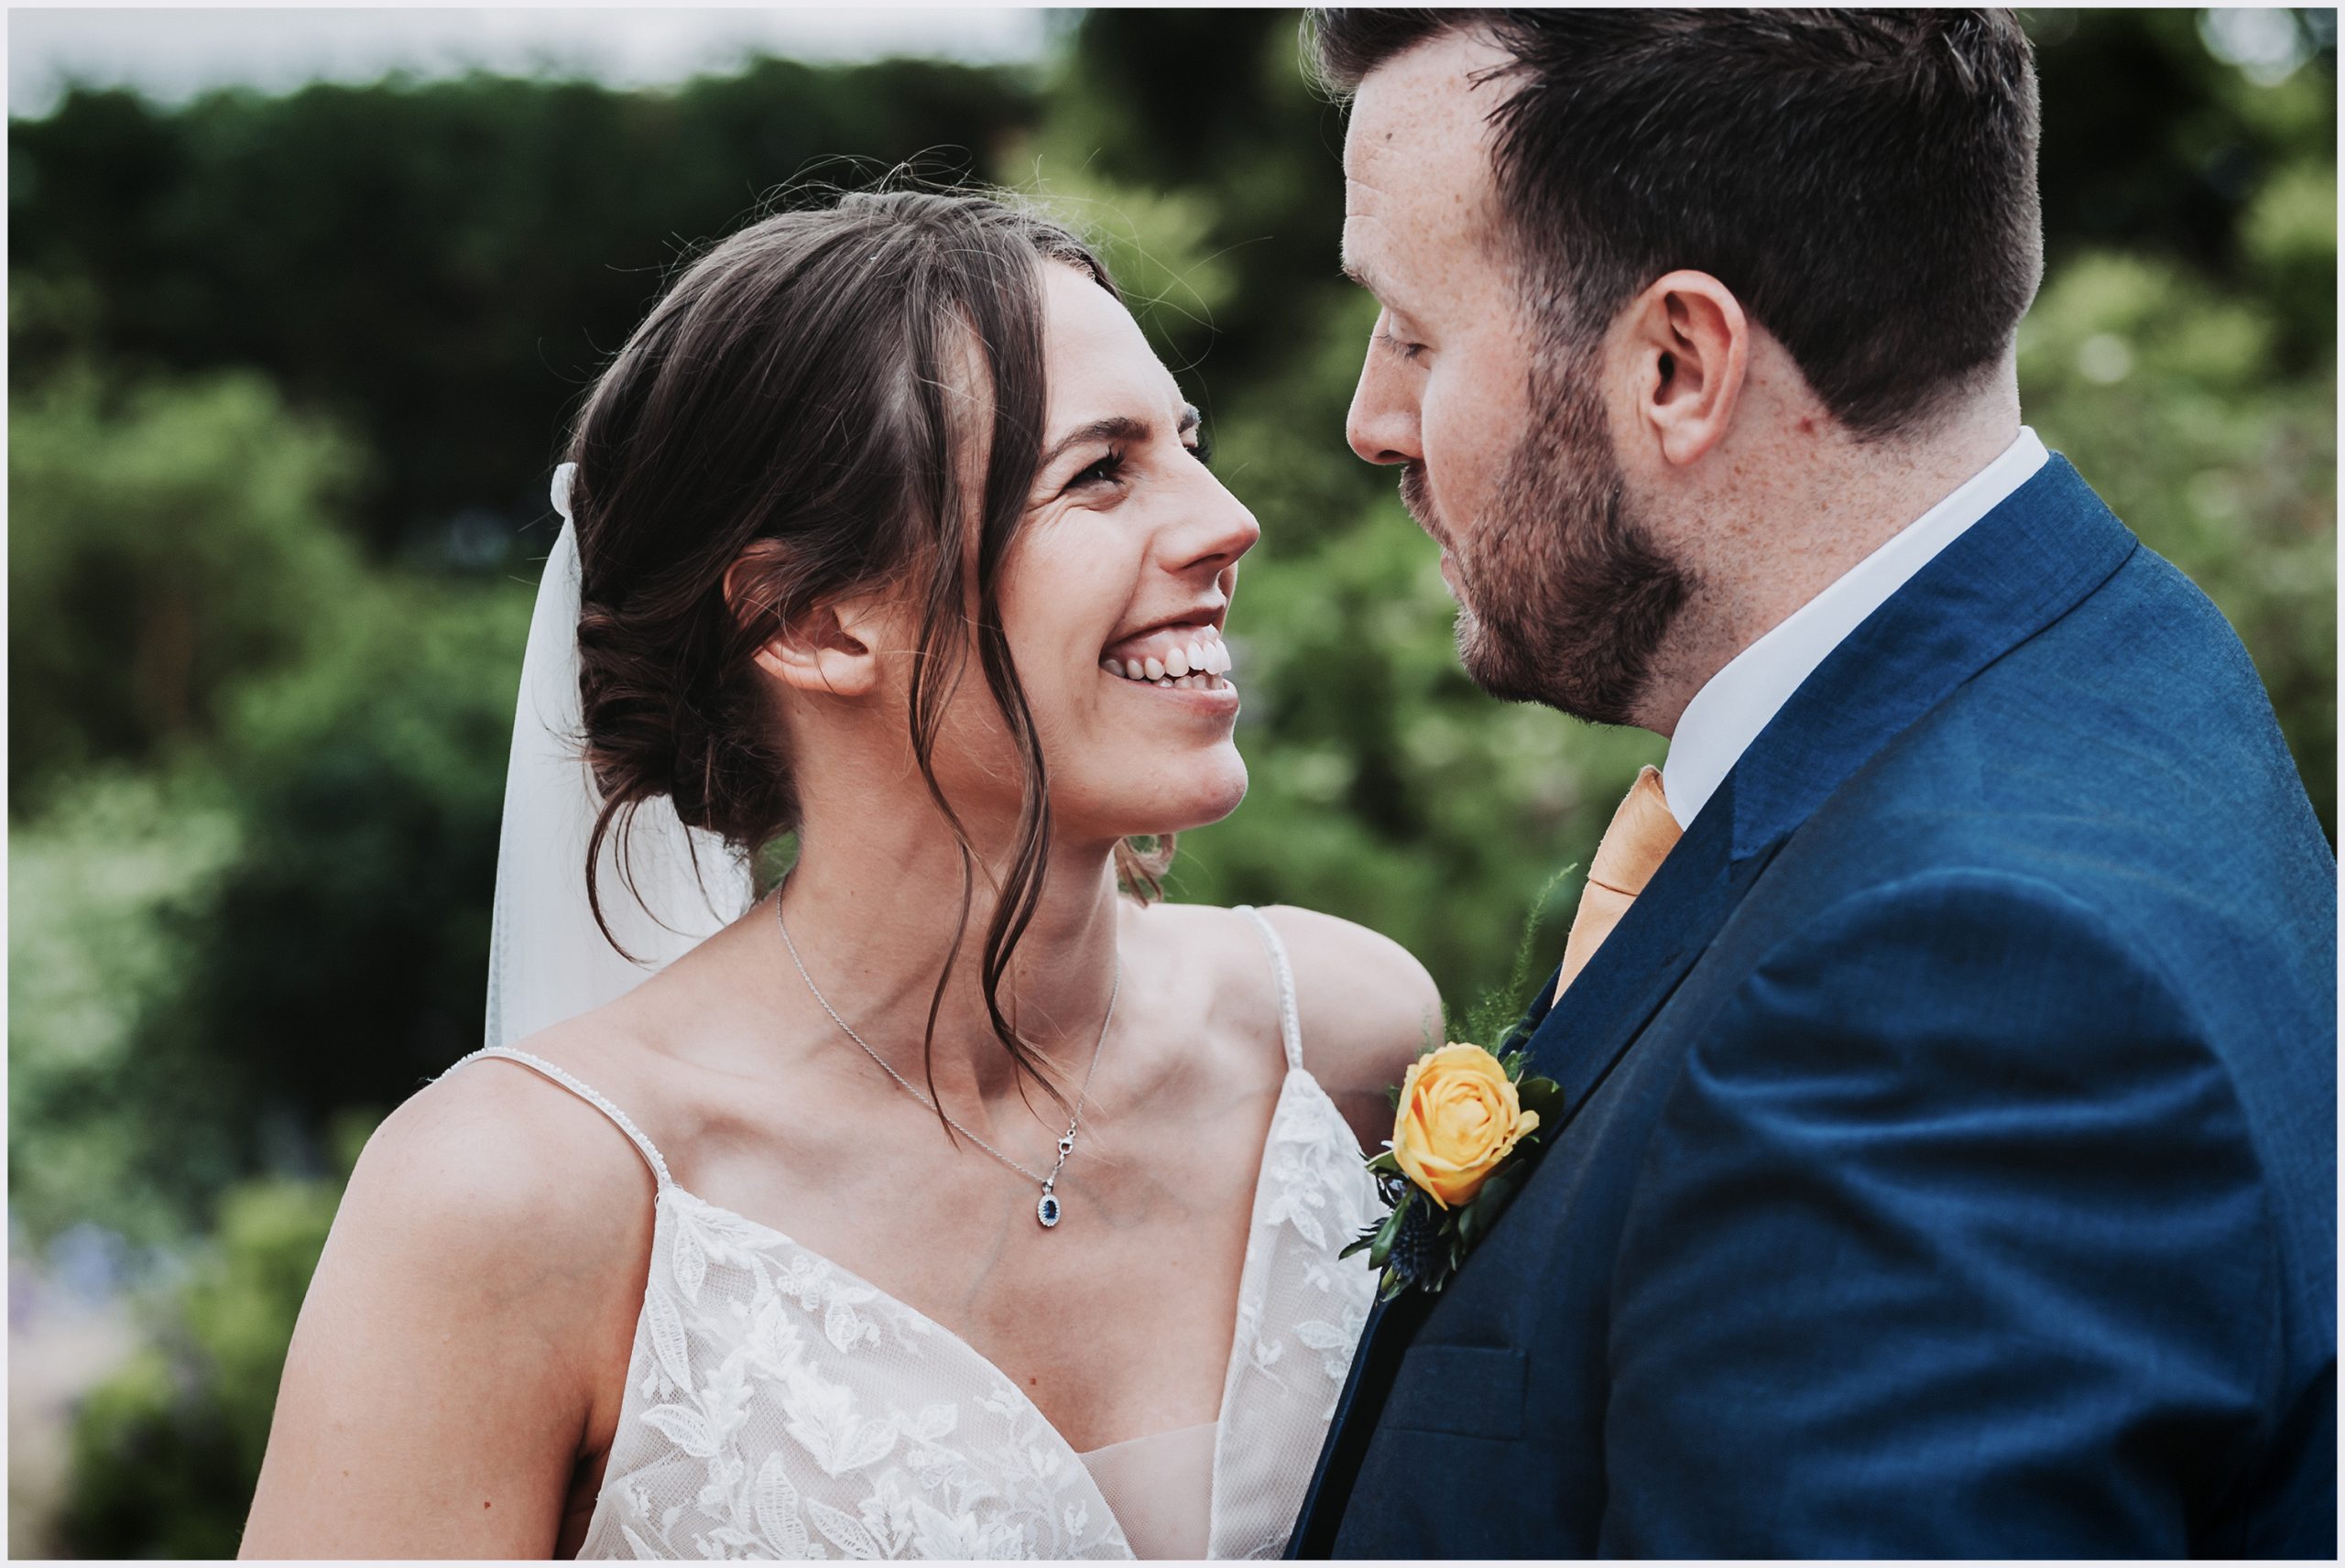 A bride smiles and stares into her husband's eyes during their bride and groom photoshoot.  Image captured by Helena Jayne Photography a wedding photographer based in north Wales